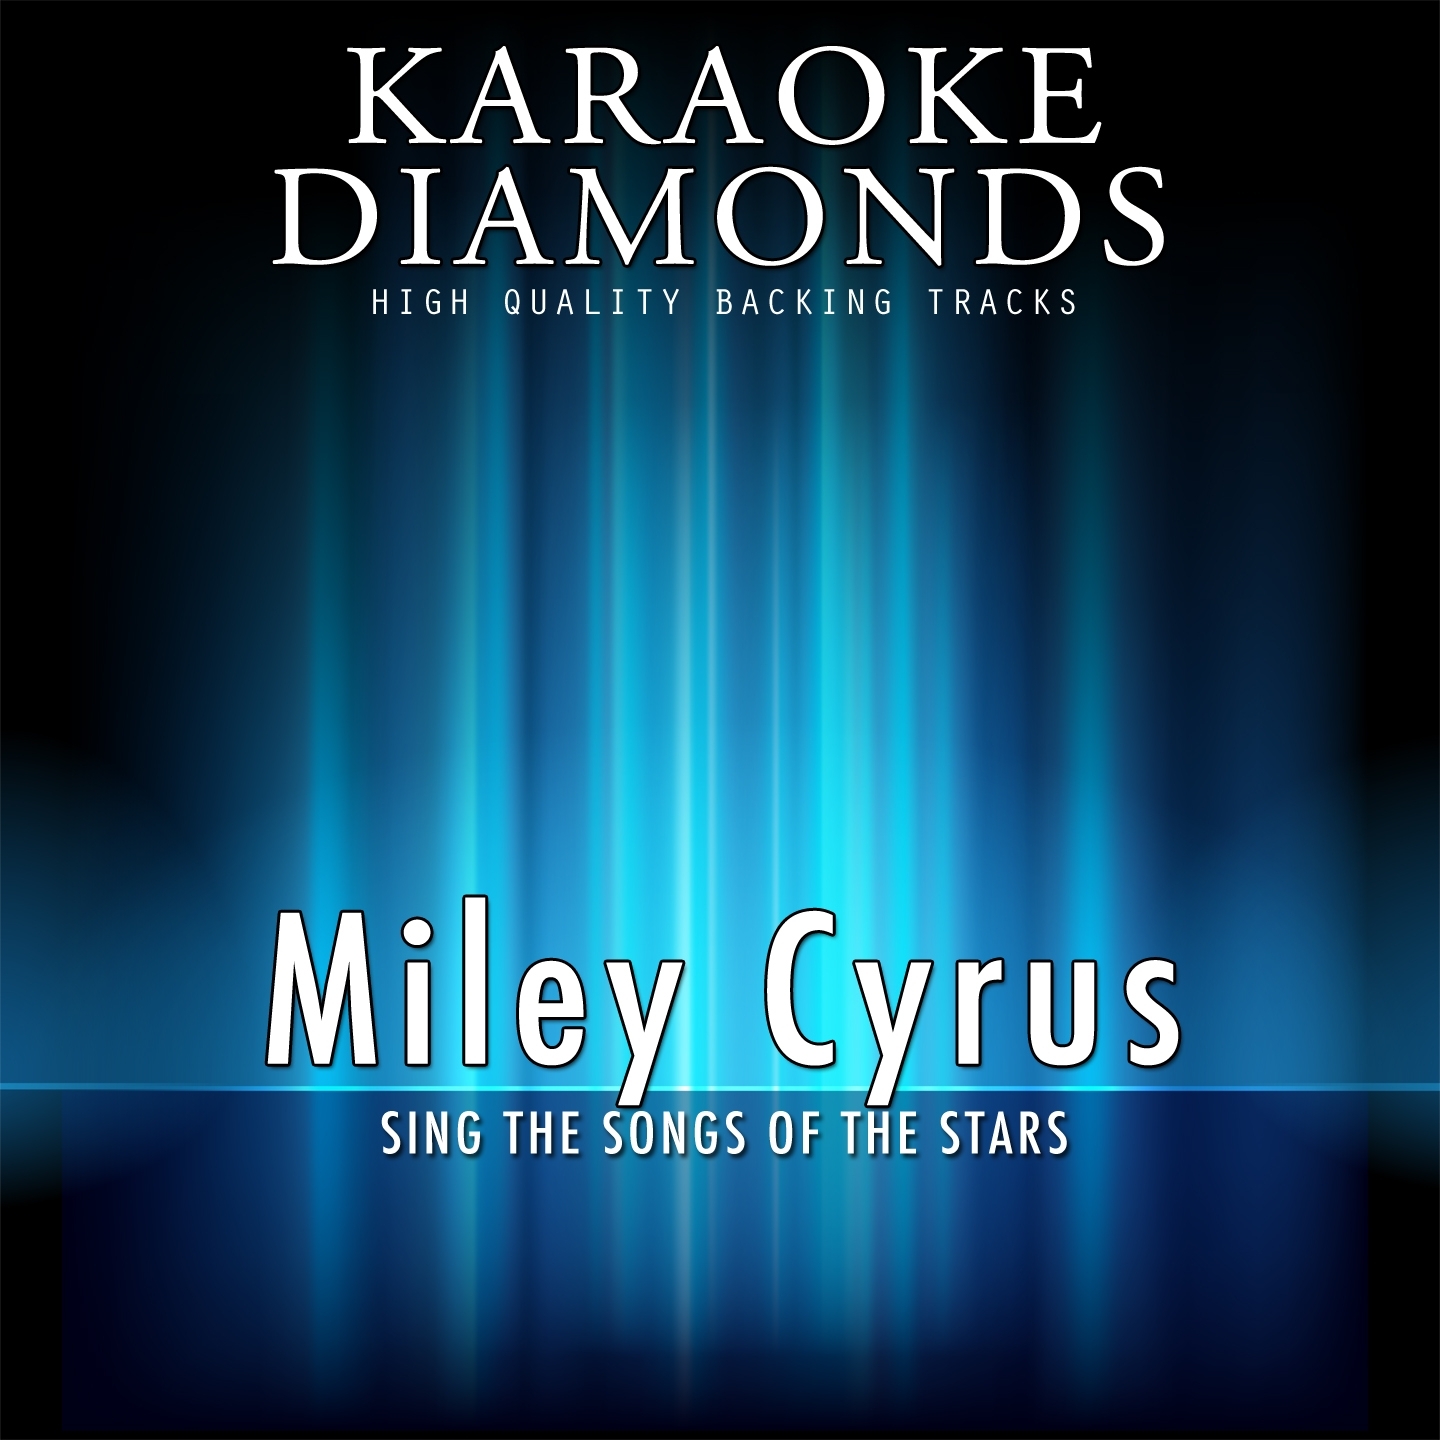 You'll Always Find Your Way Back Home (Karaoke Version) (Originally Performed By Miley Cyrus)